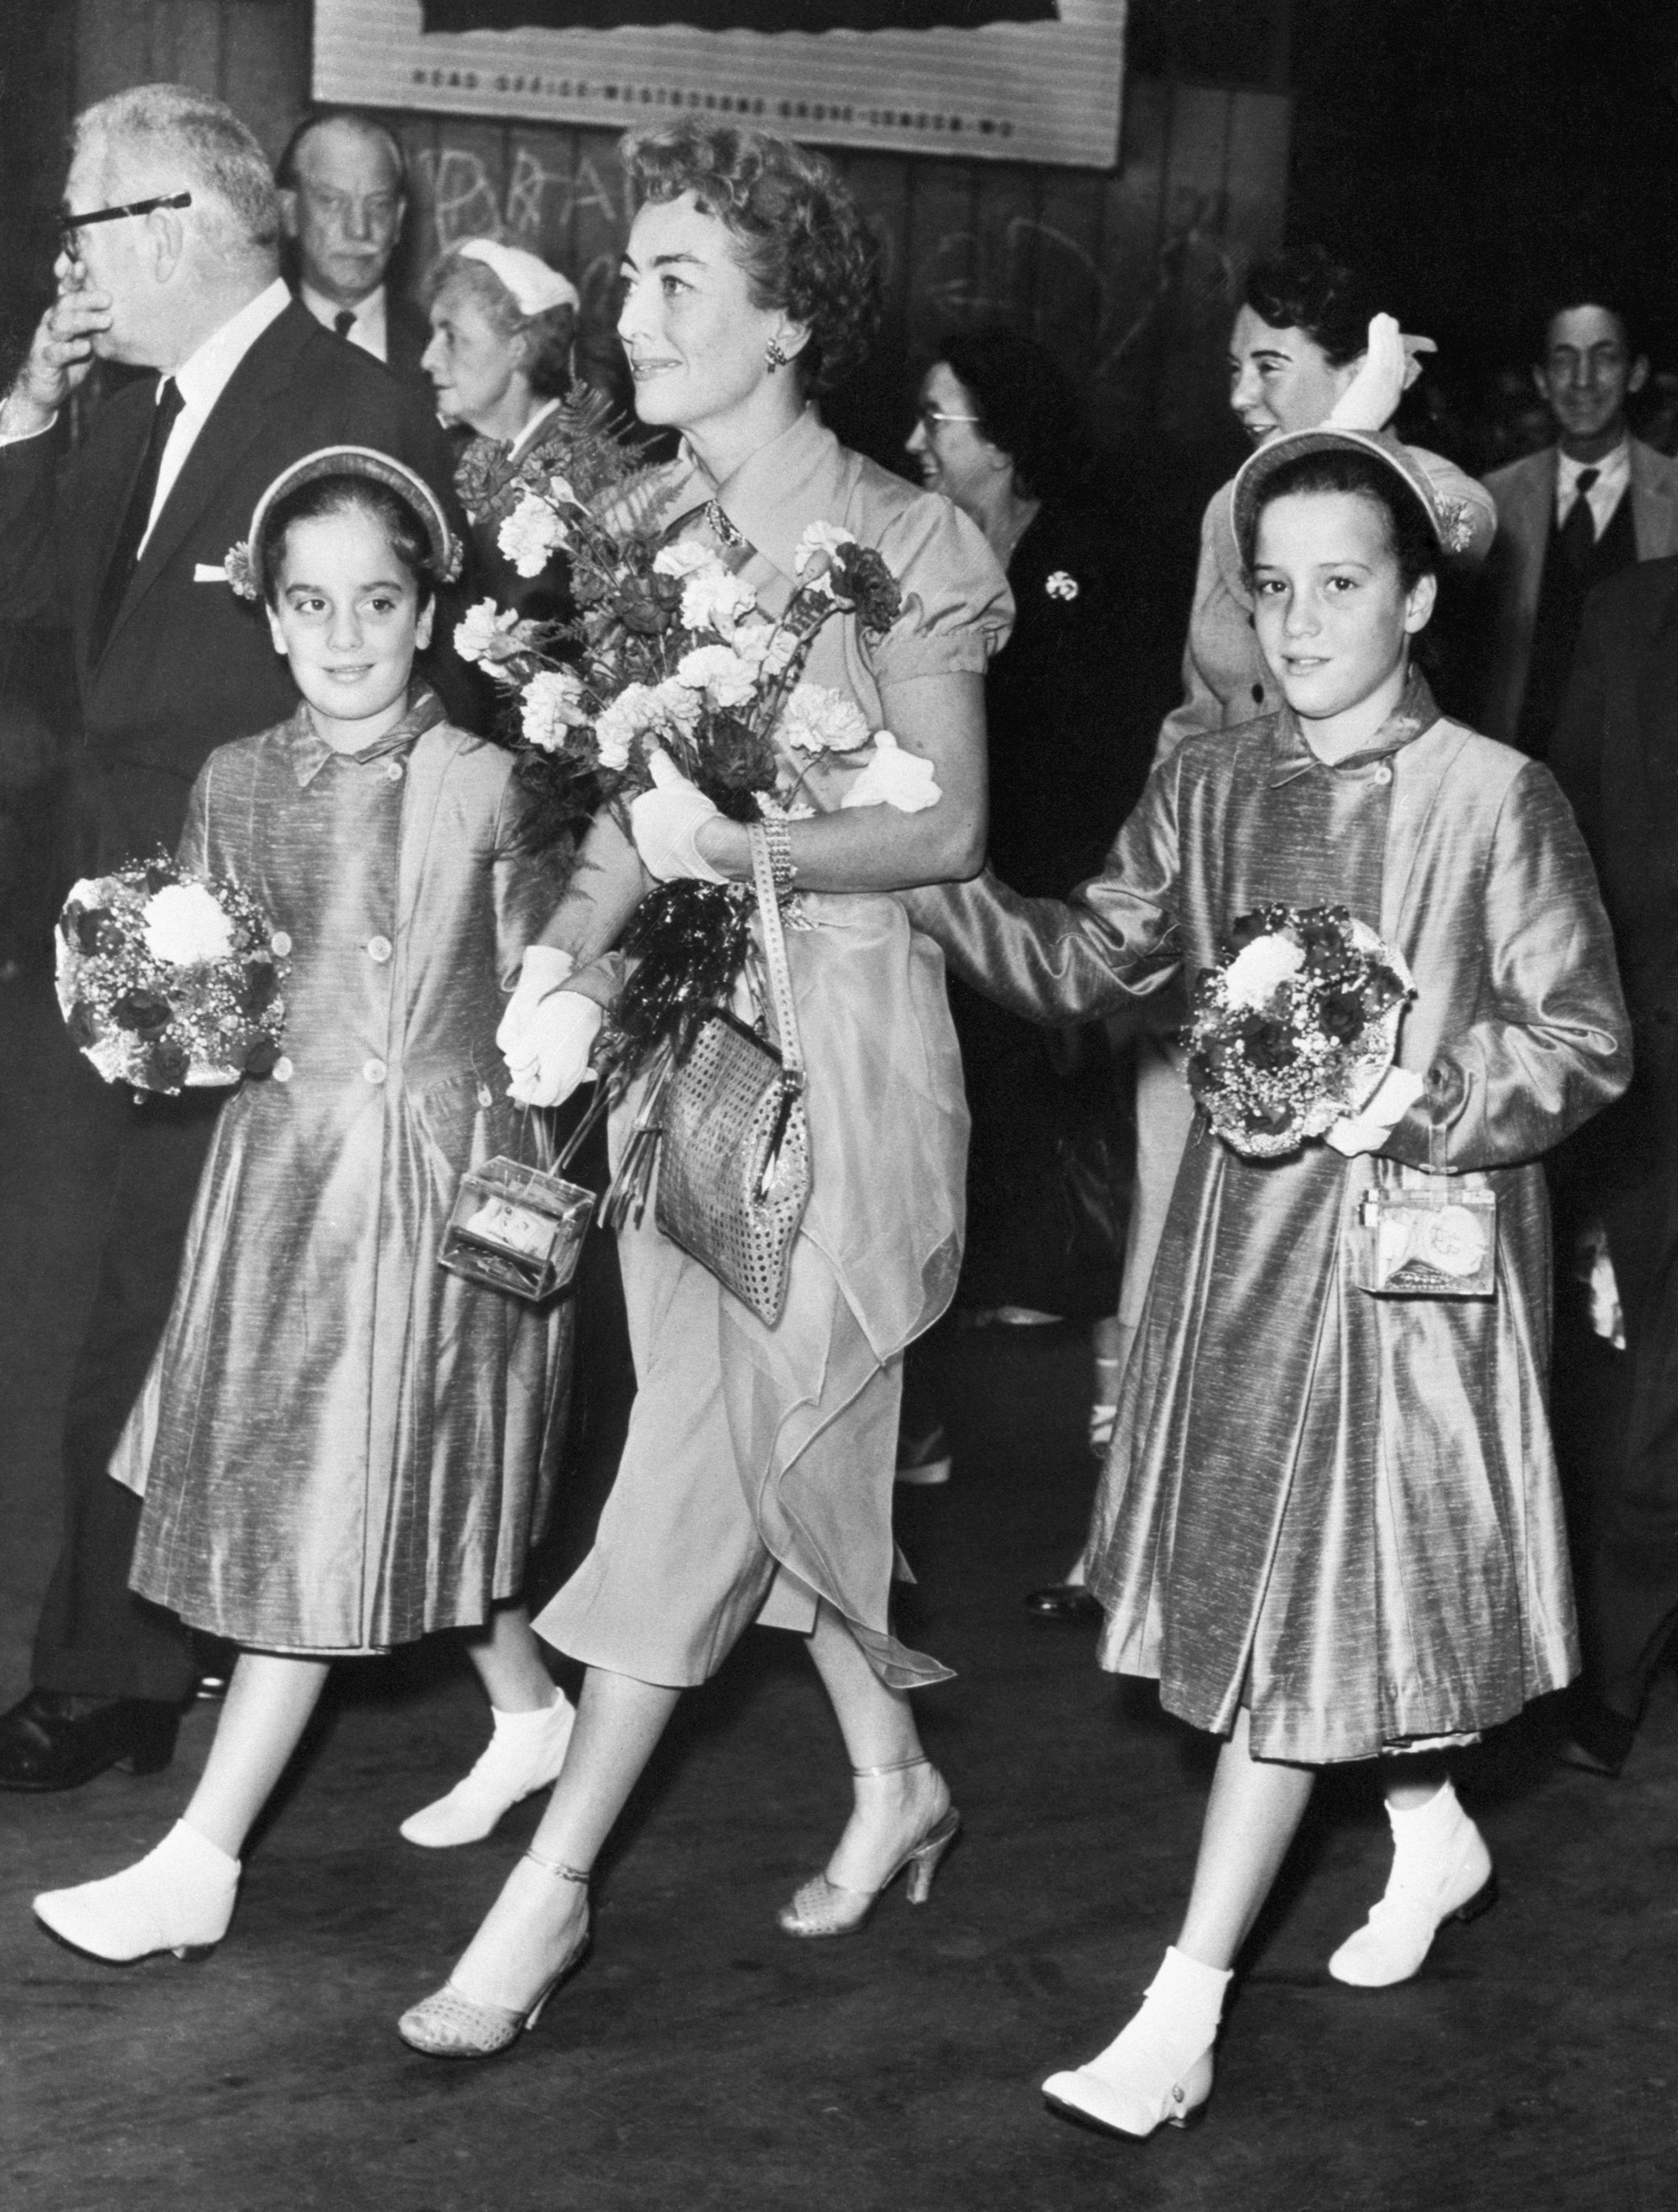 Hollywood actress Joan Crawford strides along the platform of London's Paddington Station with her adopted twin daughters, Cynthia (right) and Cathy, 8/3/56-London, England: | Source: Getty Images